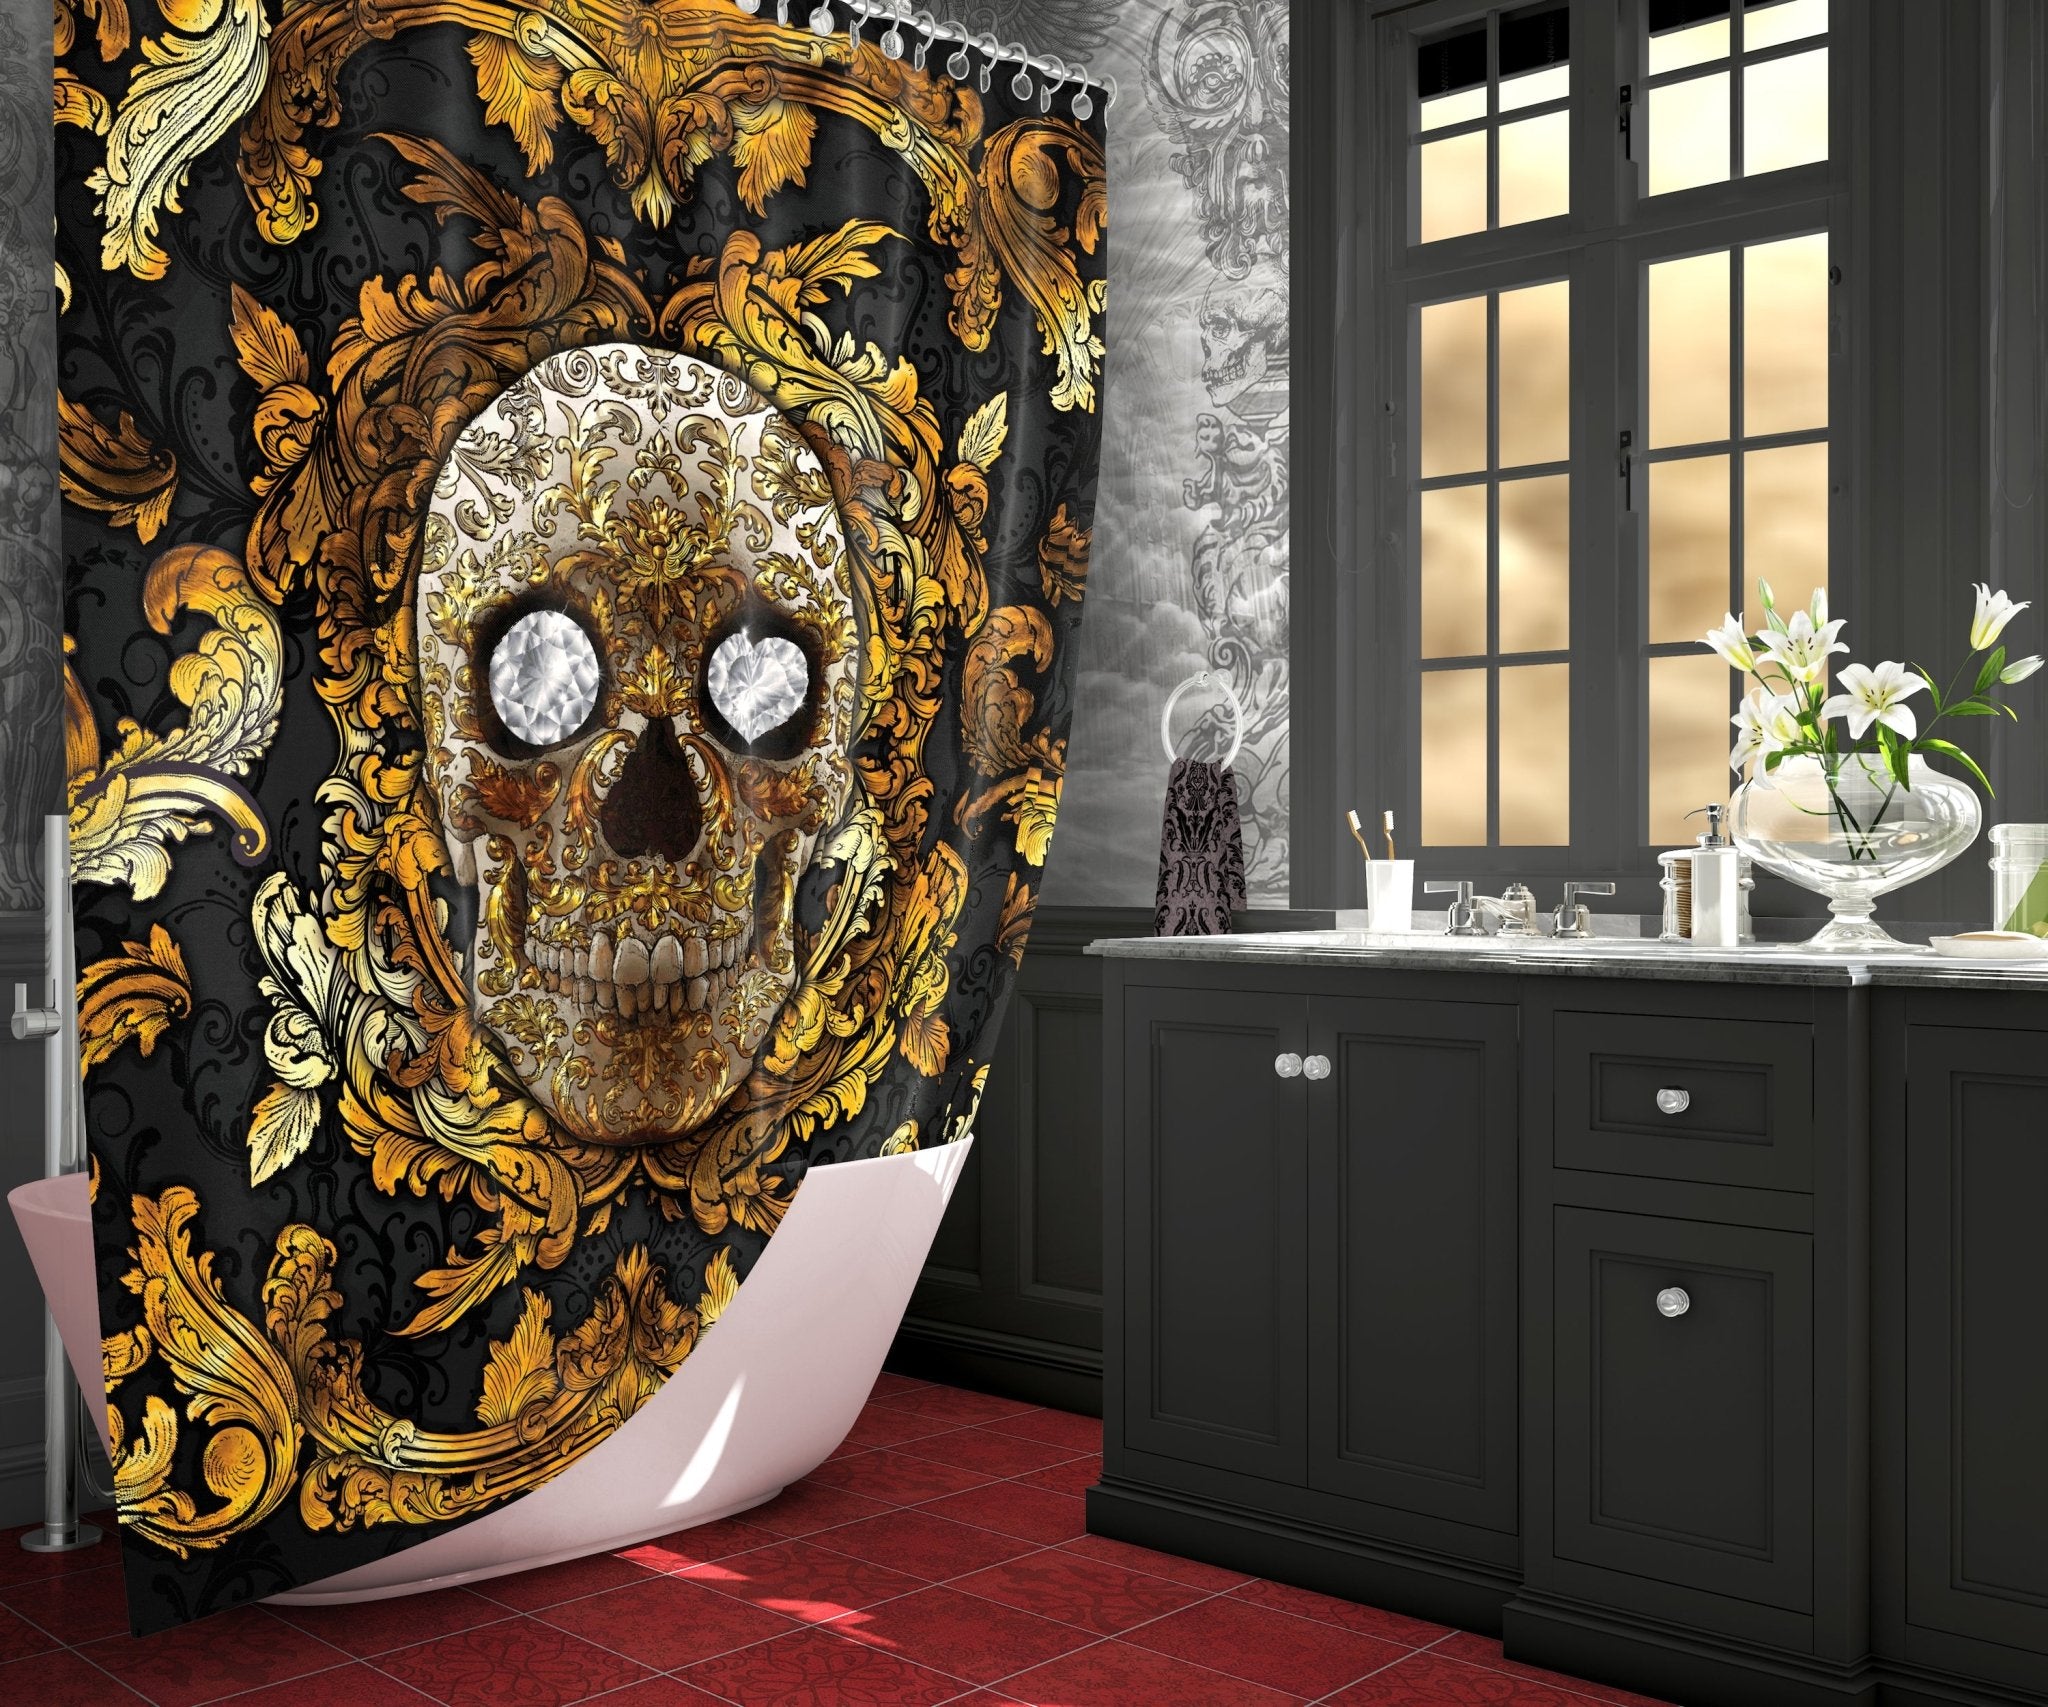 Skull Shower Curtain, 71x74 inches, Victorian Bathroom Decor, Baroque, Macabre Decor - Gold and Silver, 4 Colors - Abysm Internal